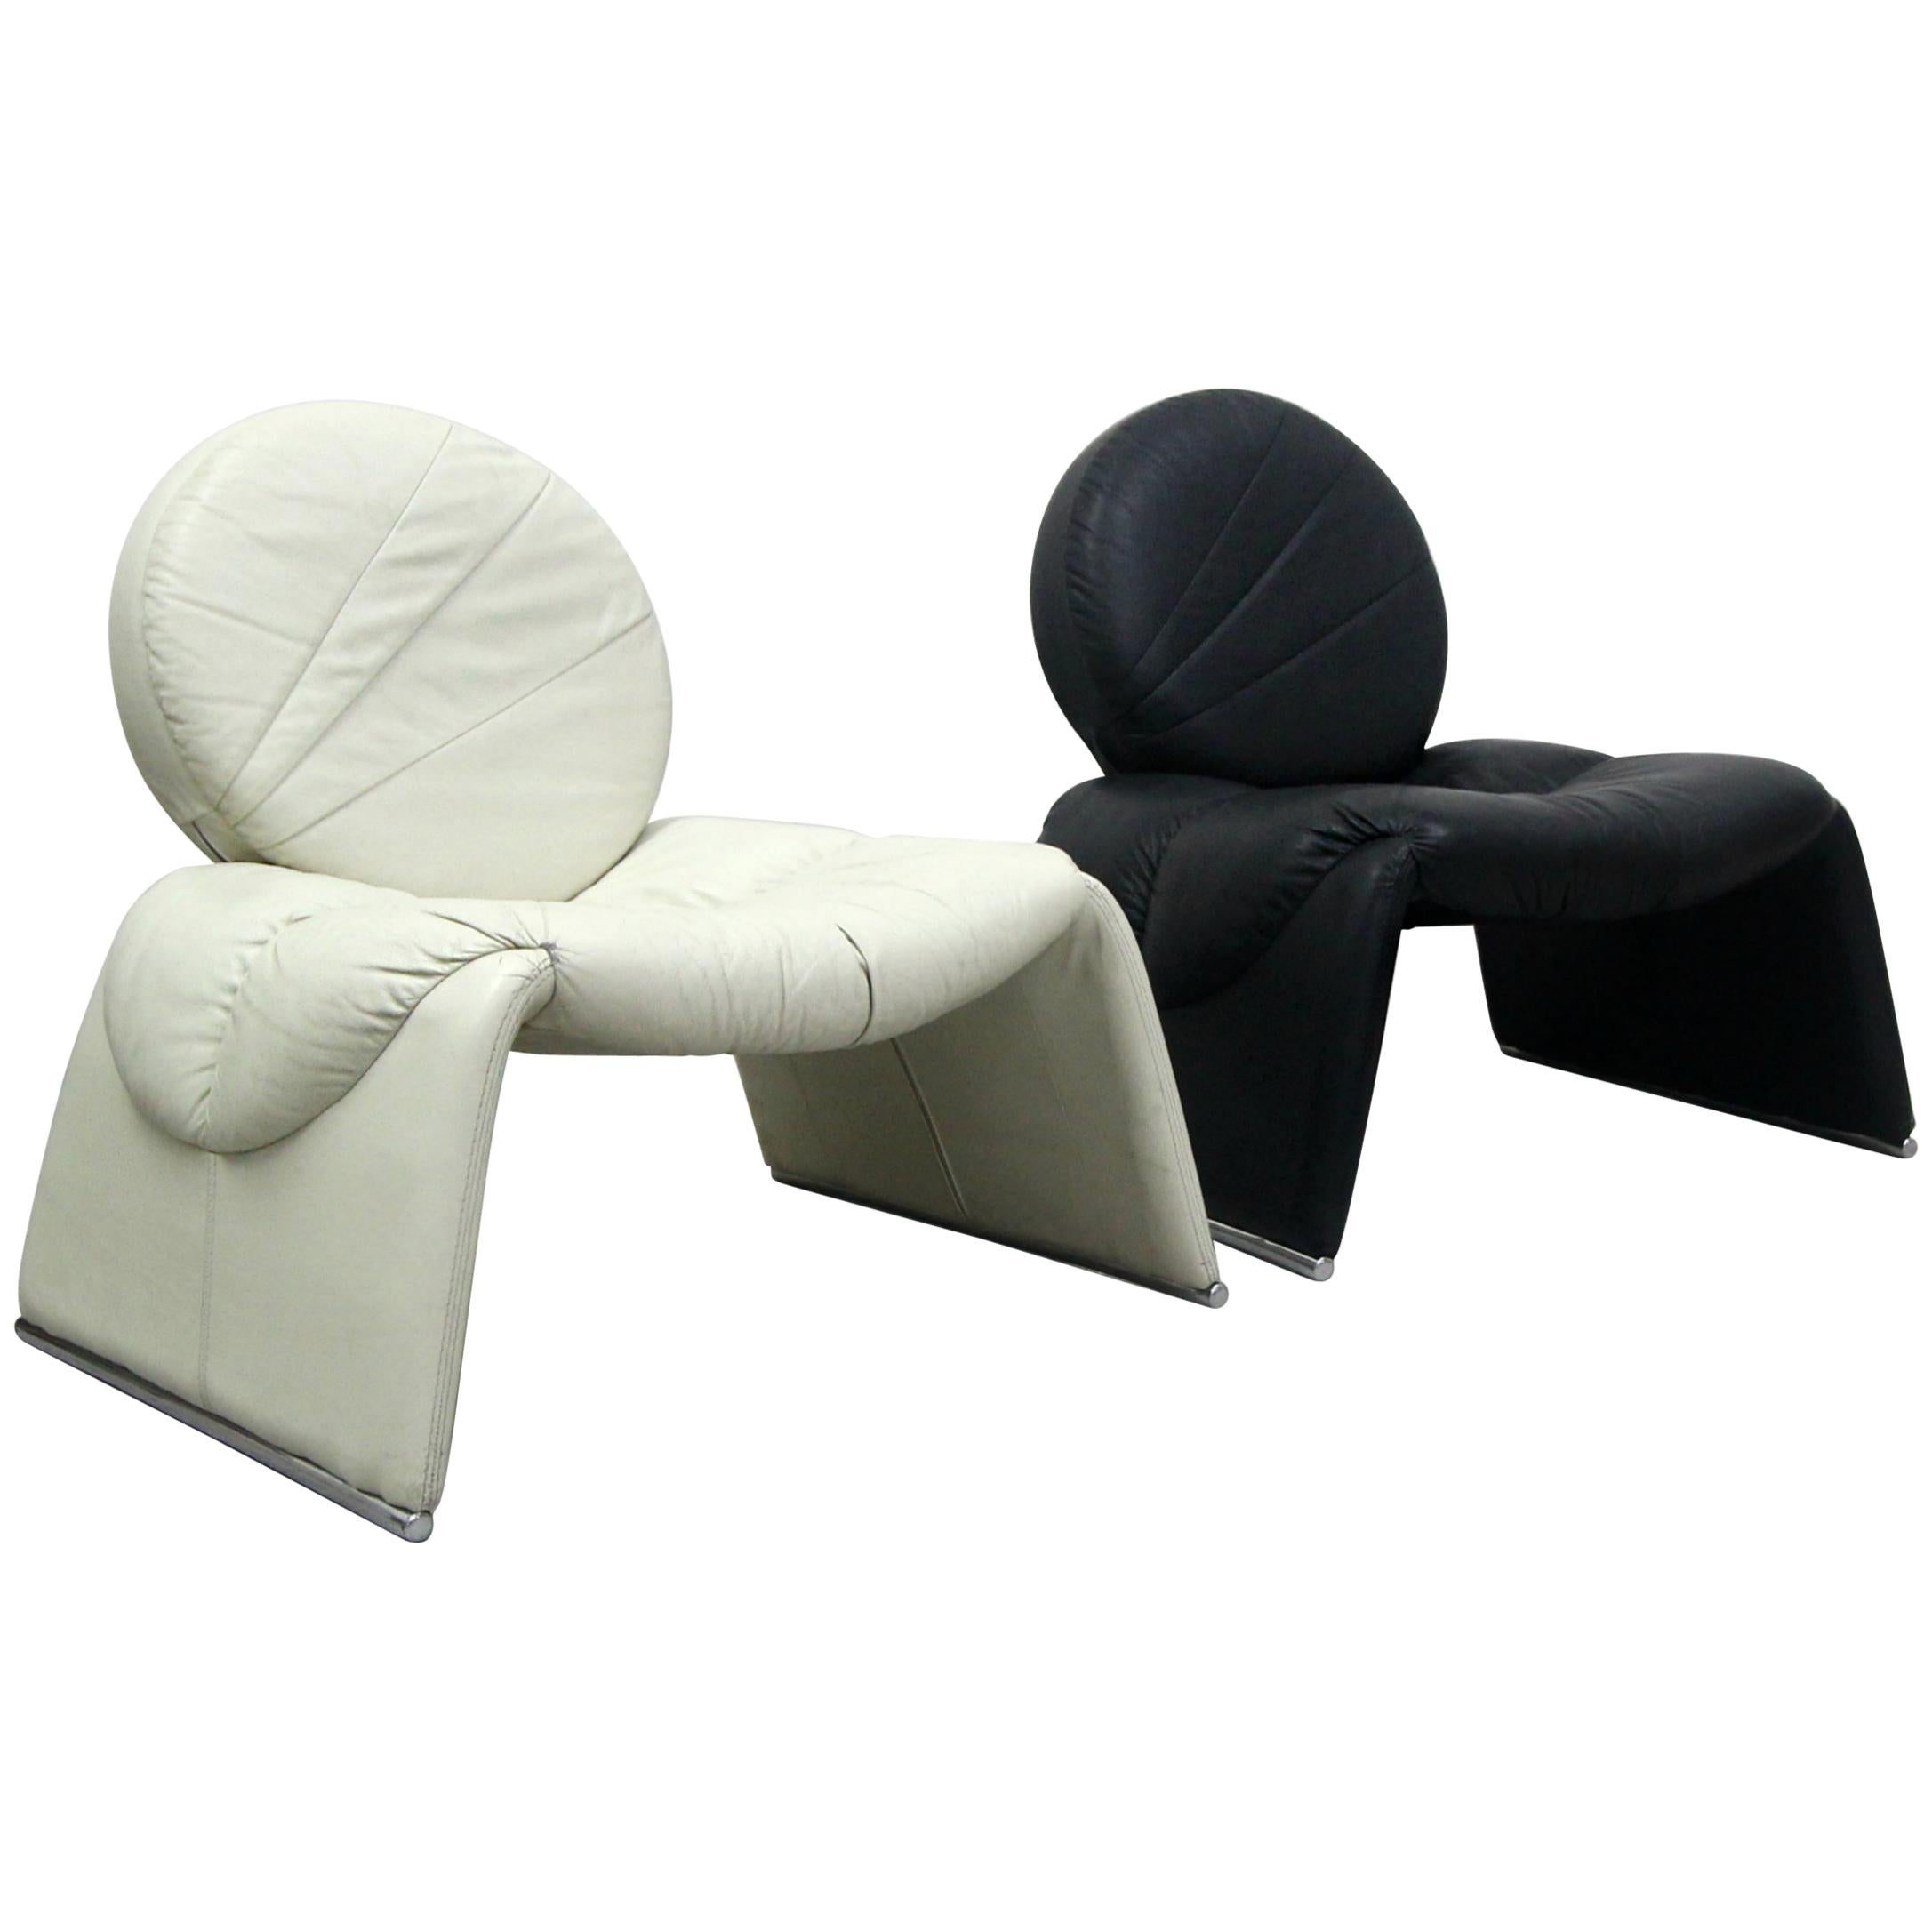 Pair of Black and White Leather Vintage Italian Lounge Chairs